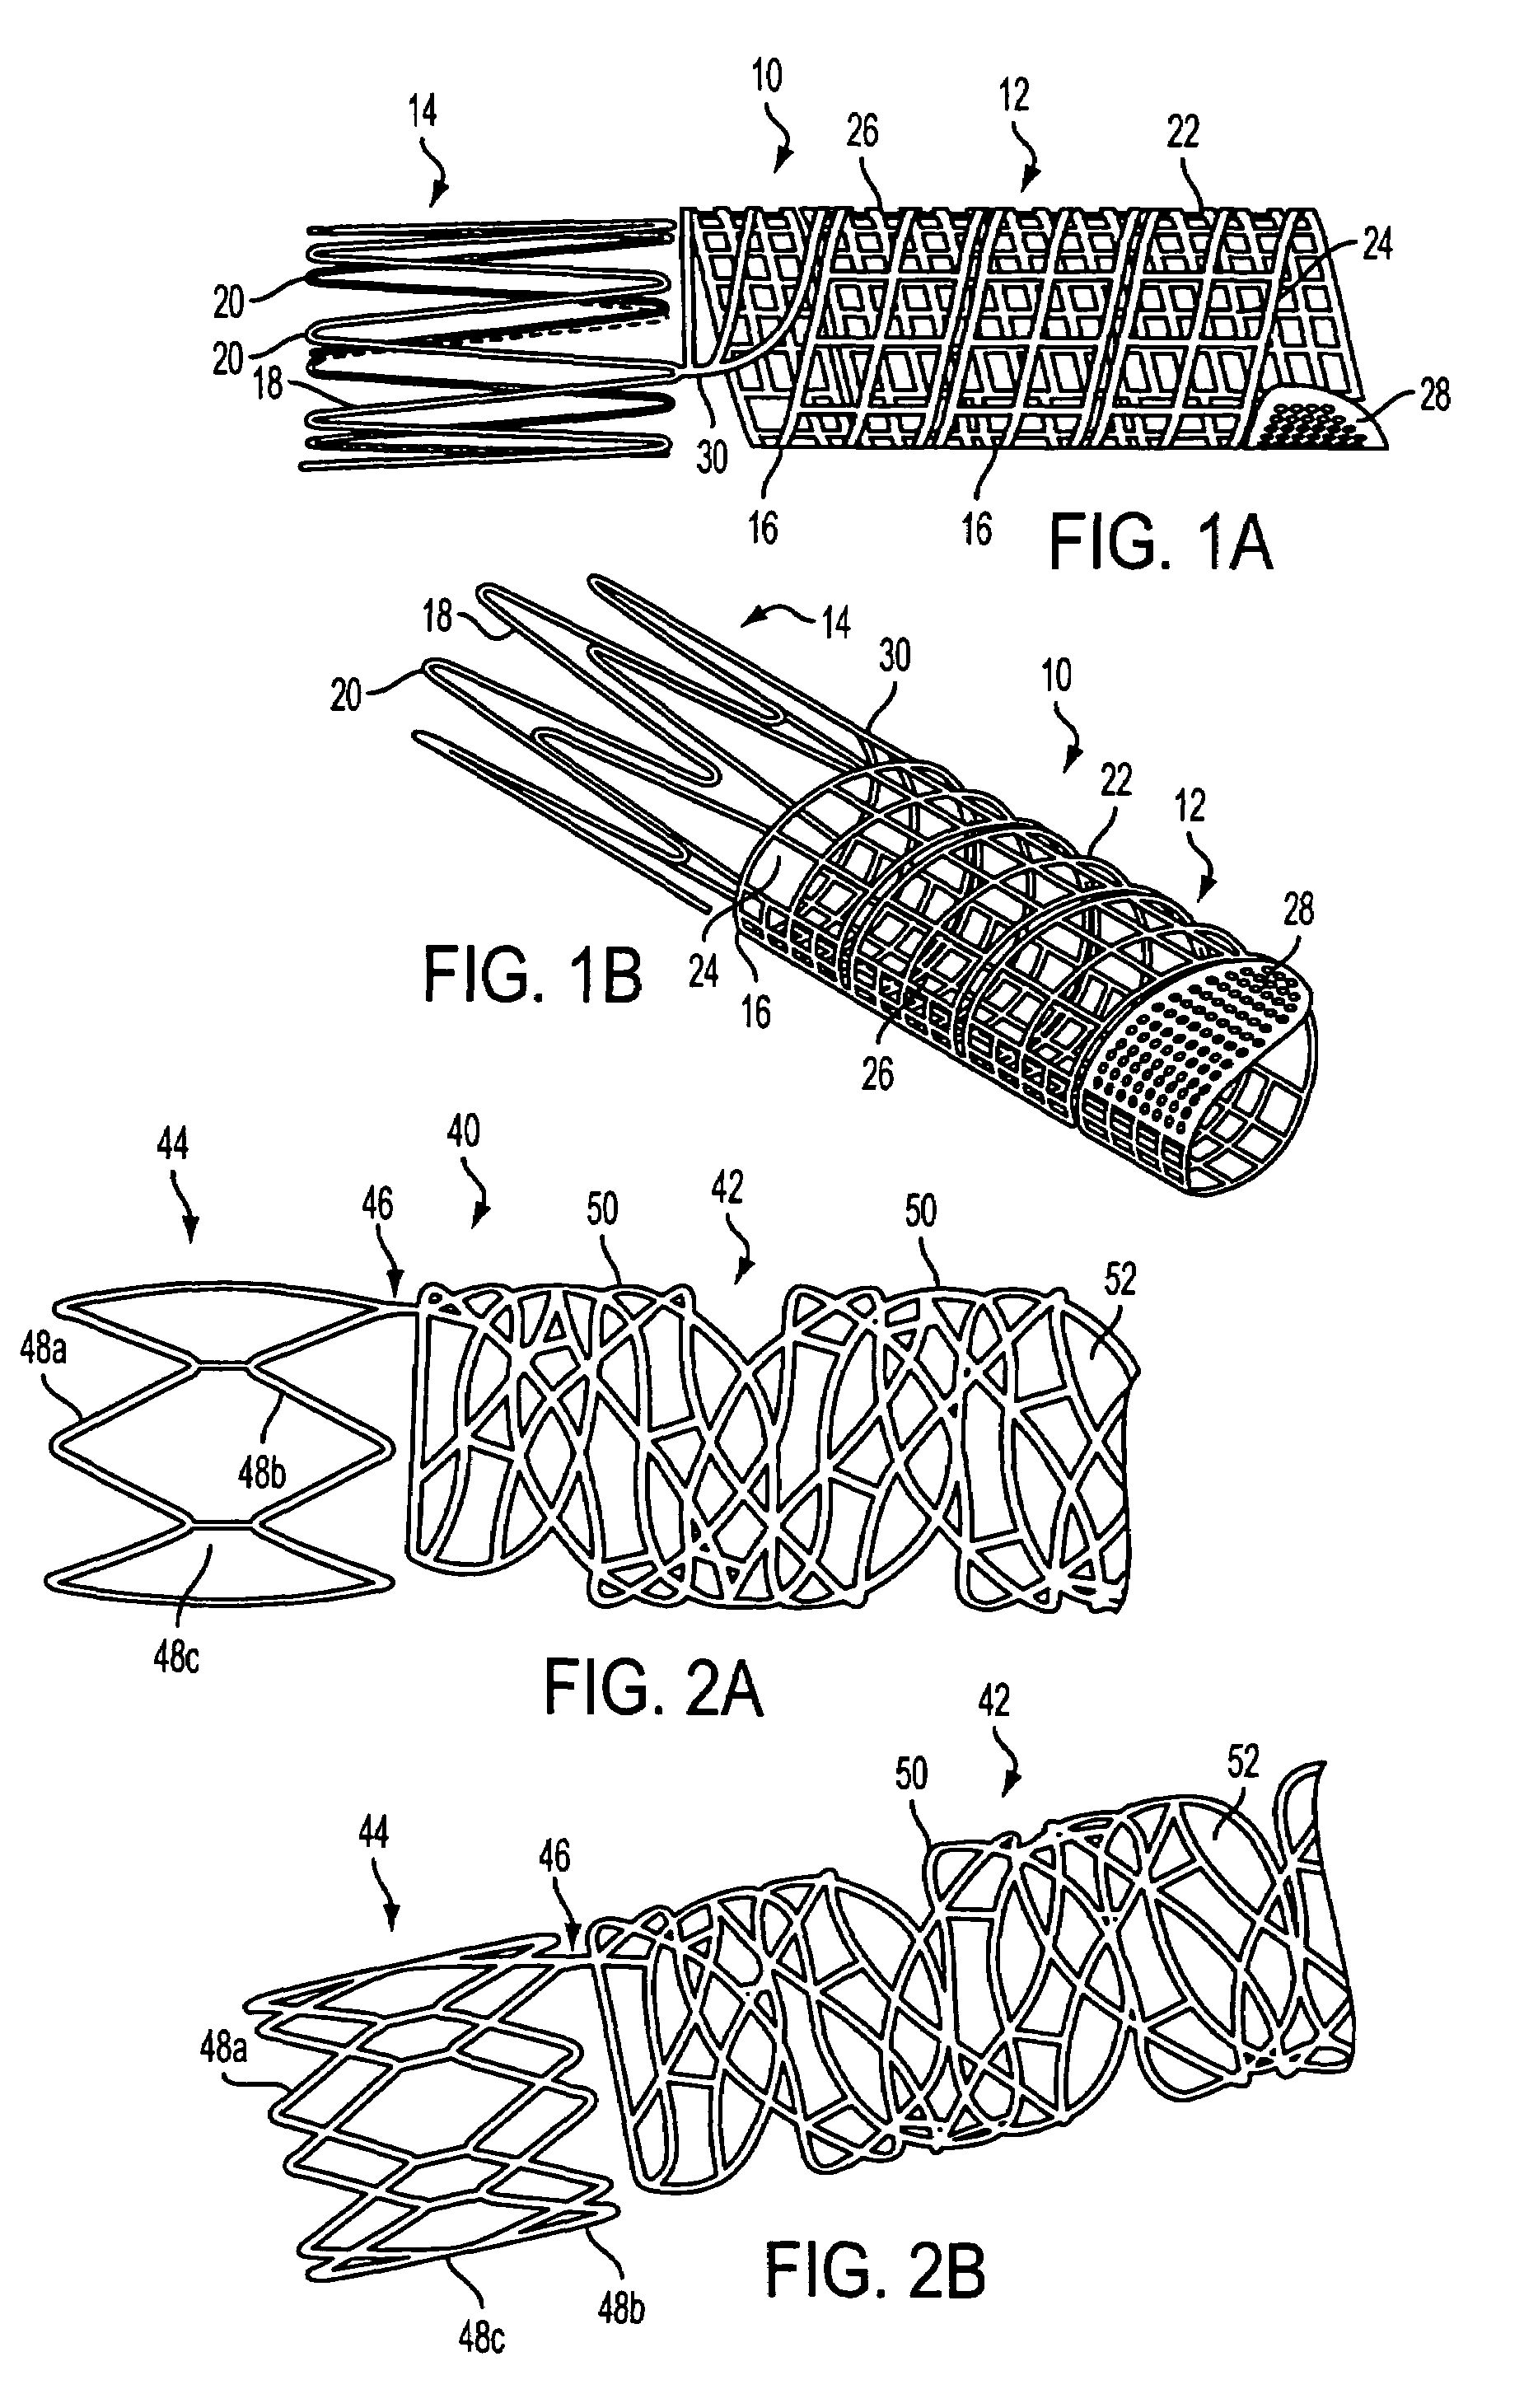 Delivery catheter for ribbon-type prosthesis and methods of use